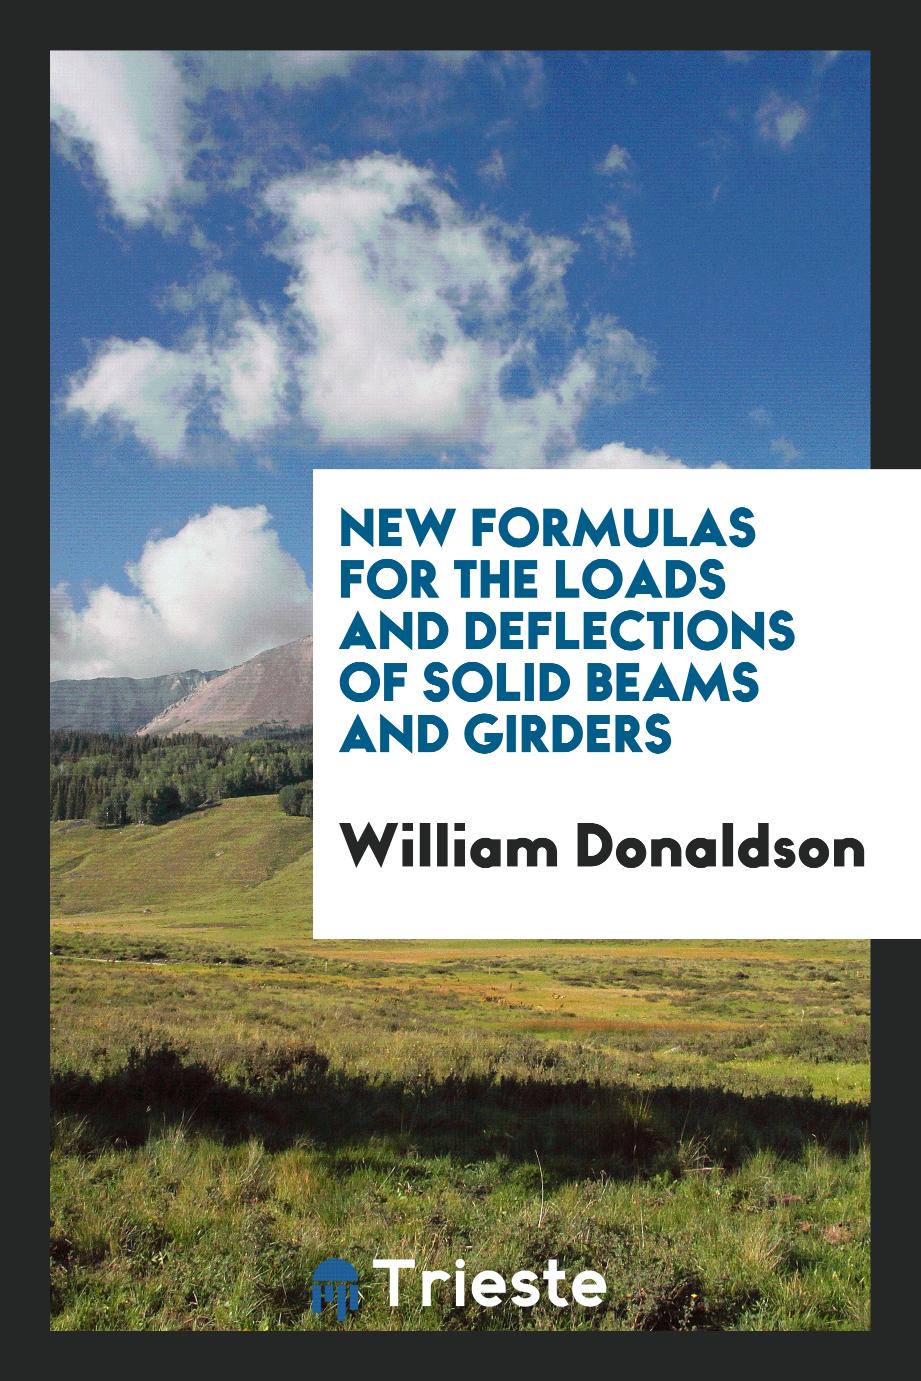 New formulas for the loads and deflections of solid beams and girders